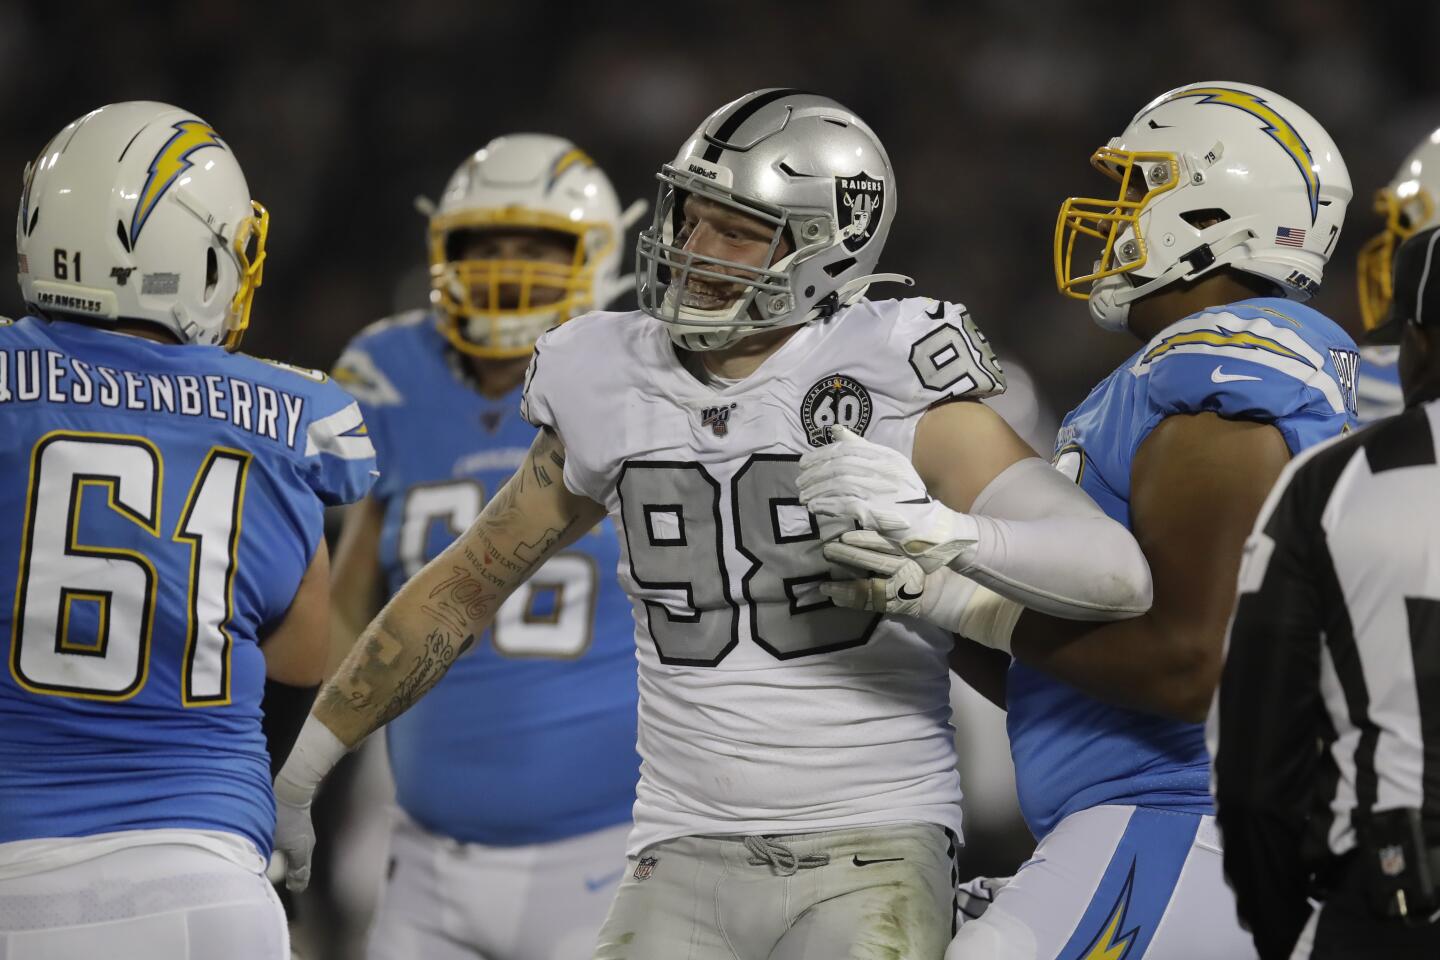 Raiders defensive end Maxx Crosby (98) reacts after a play during a game against the Chargers on Nov. 7 at RingCentral Coliseum.